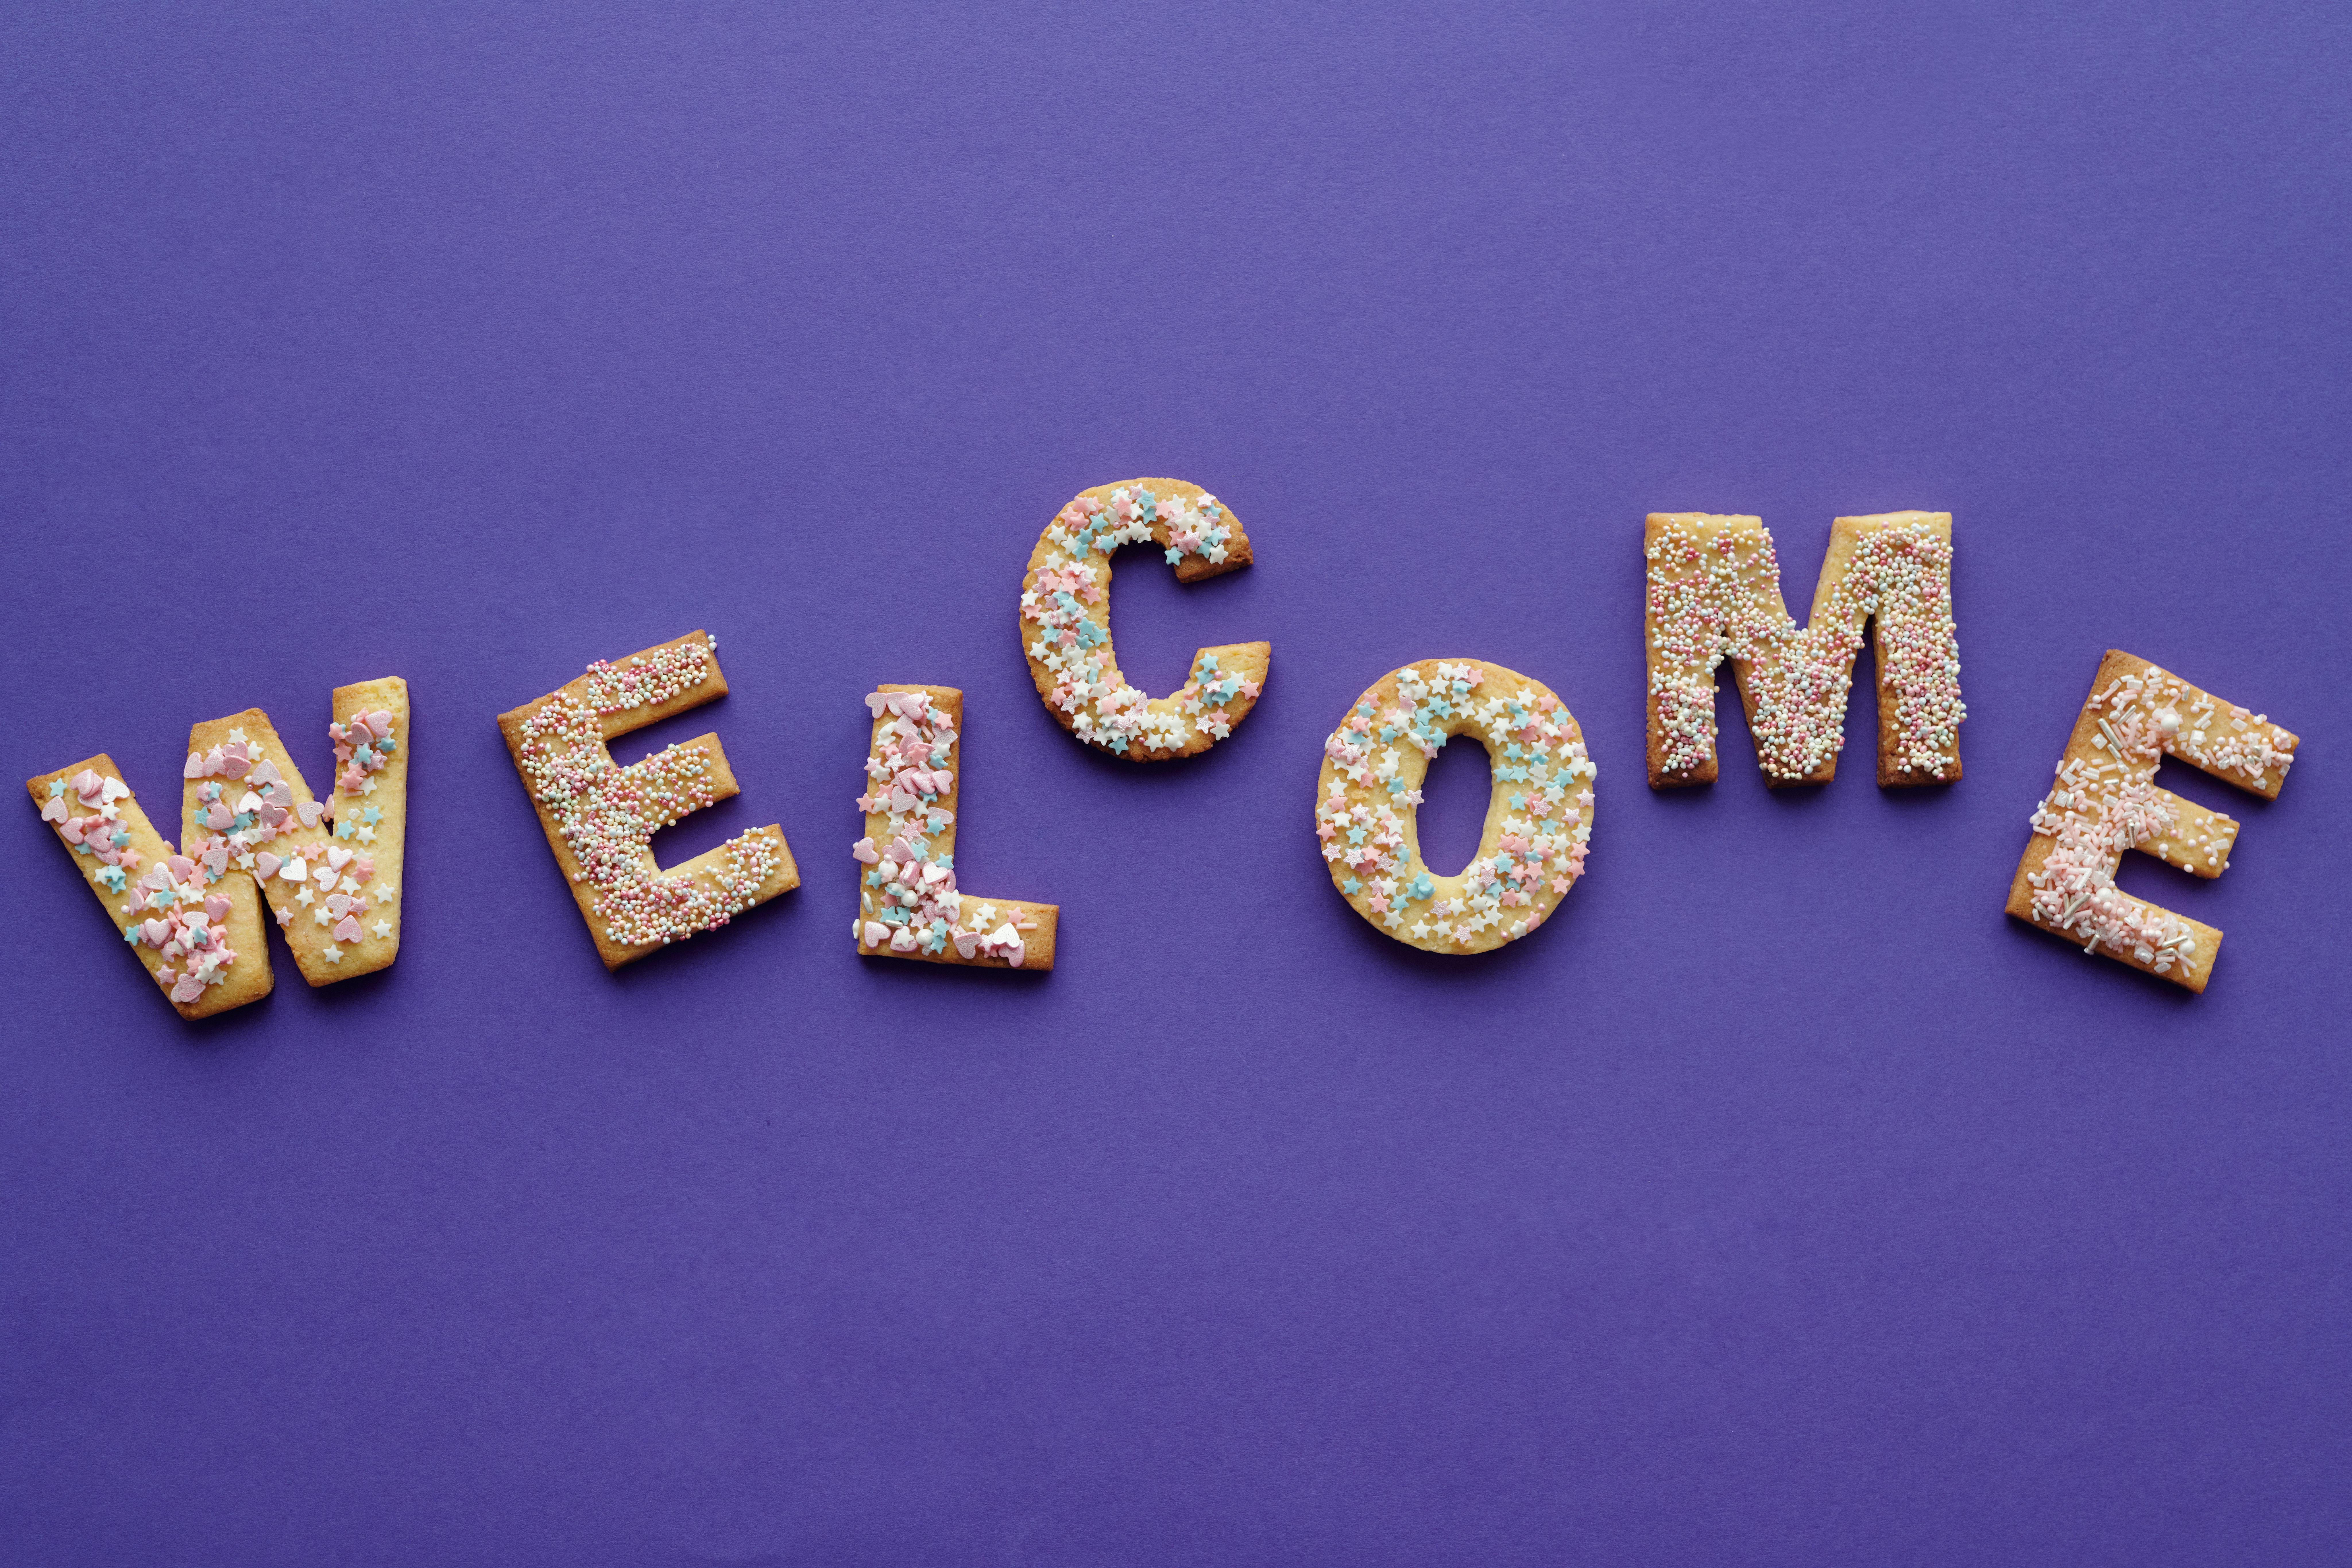 Welcome image, depicted in biscuits with a purple background.